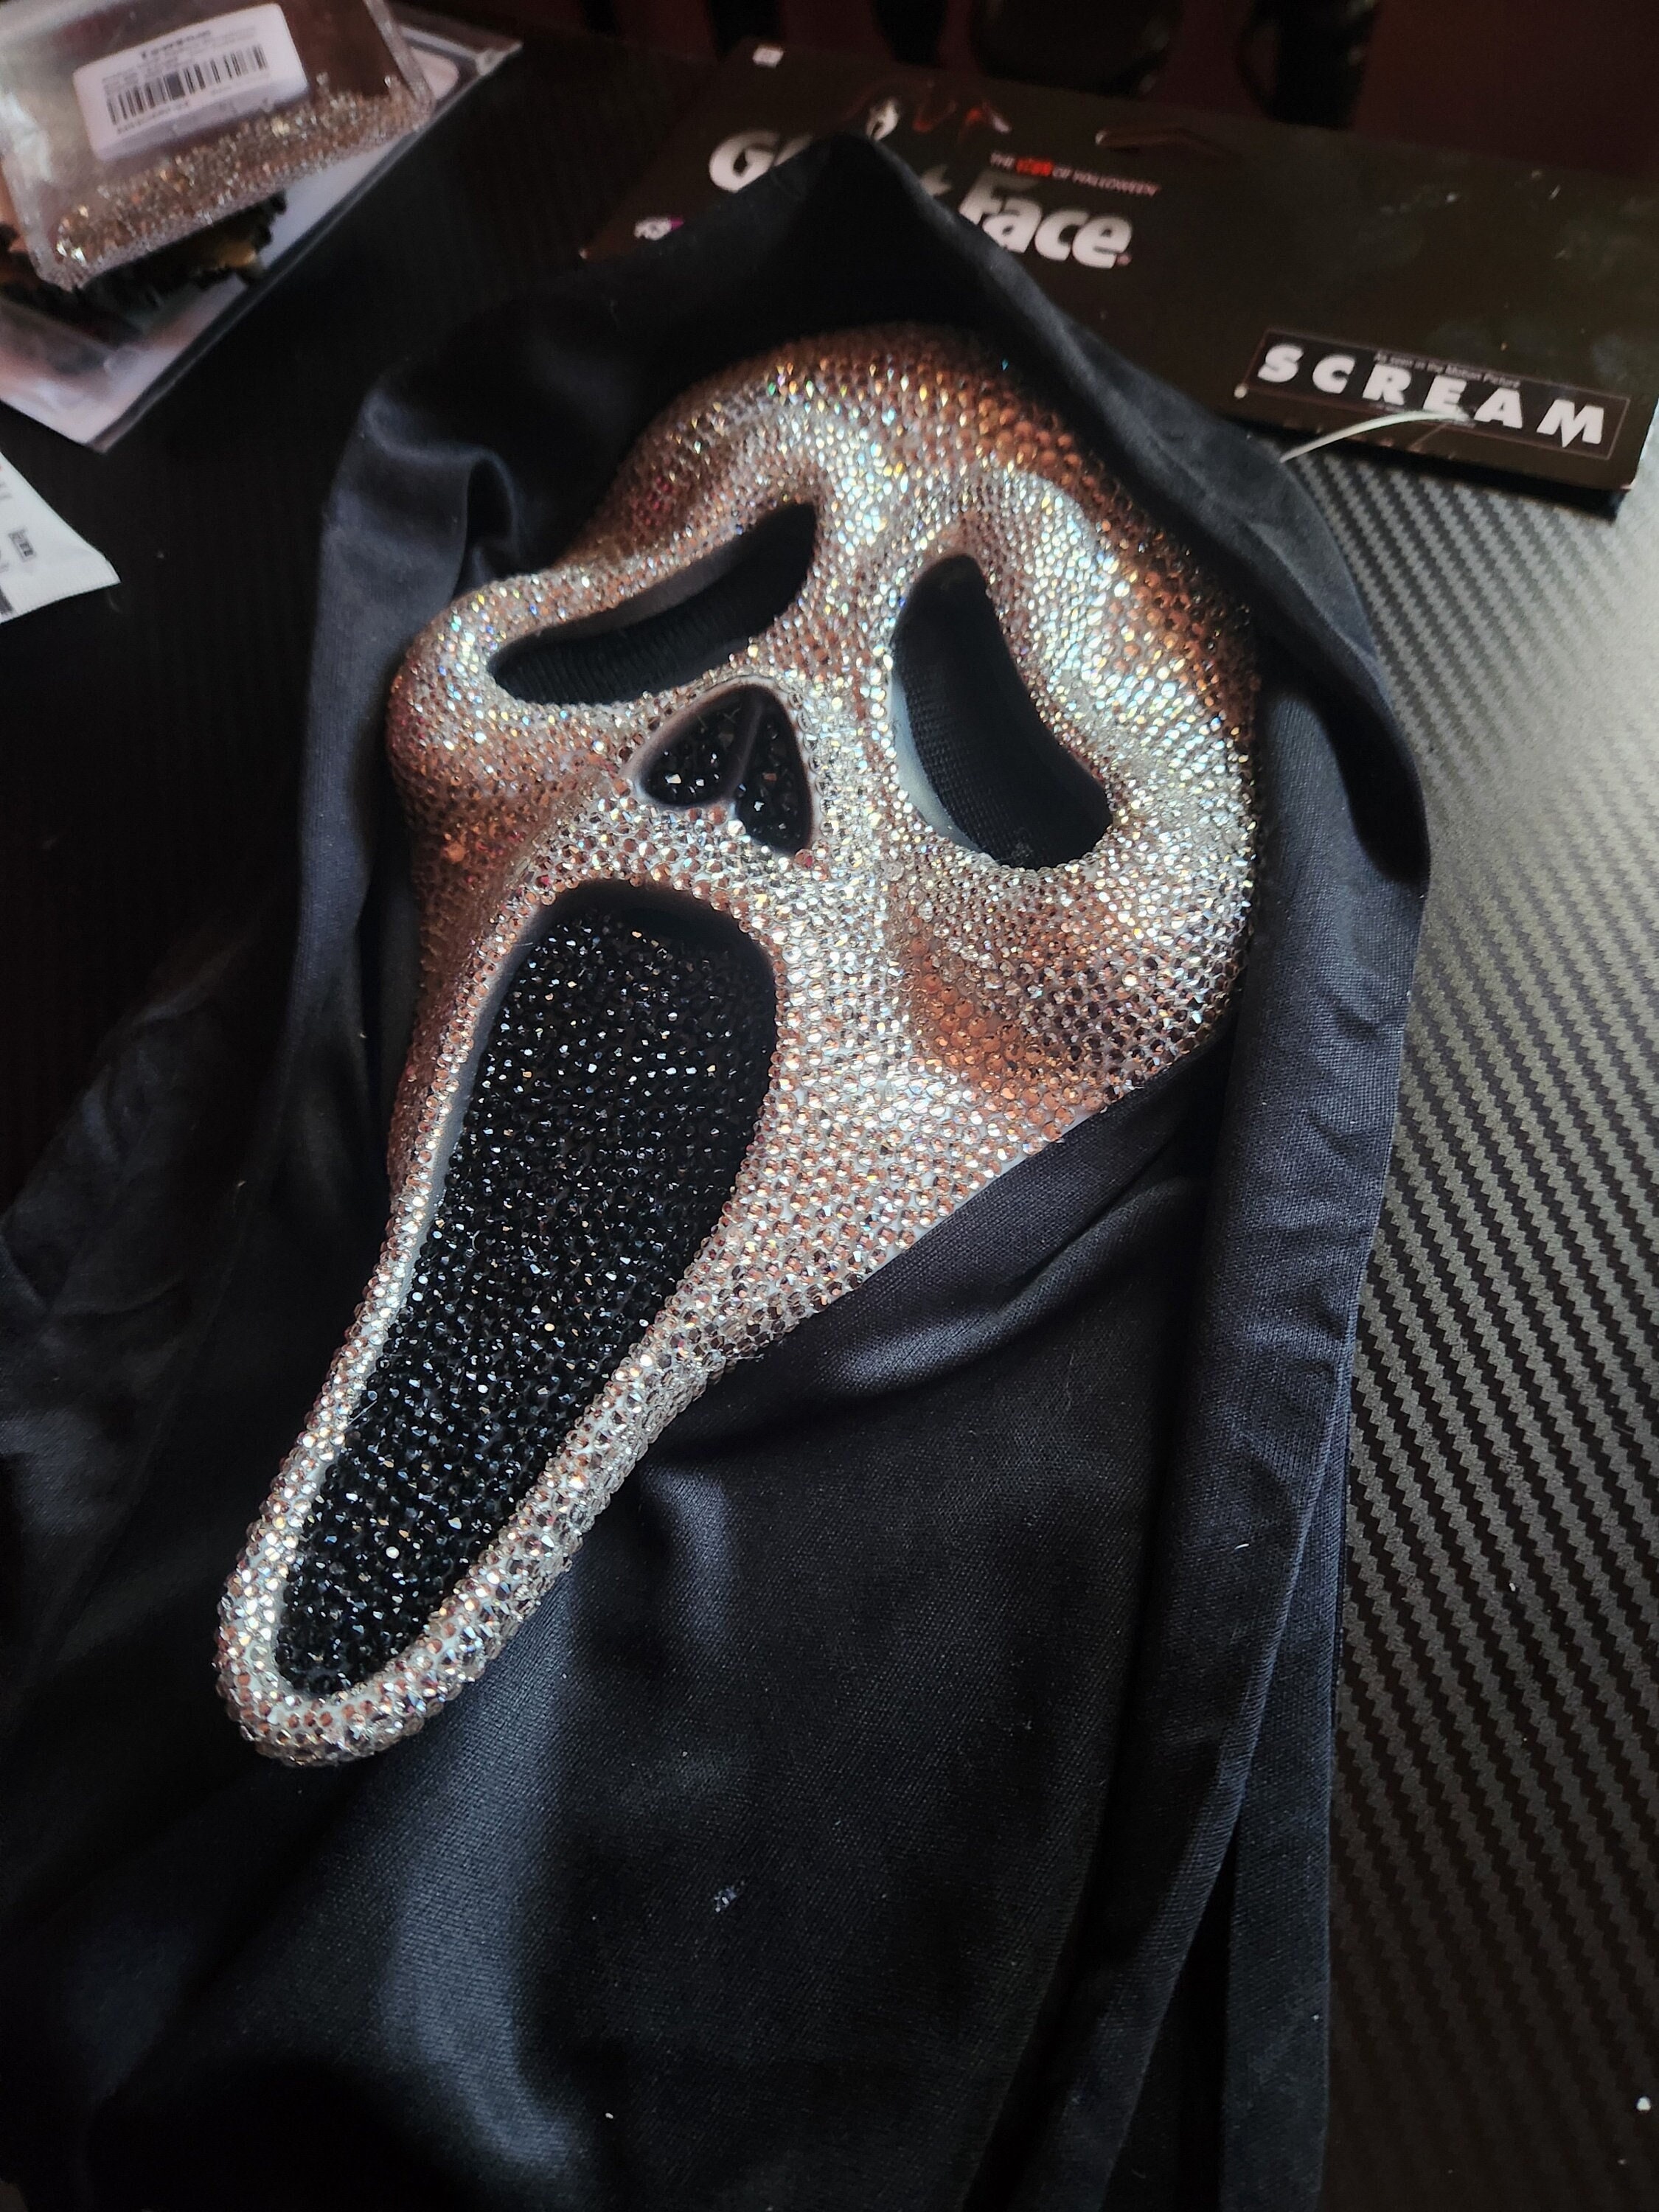 Ghost Face Scream Bling Mask - Sparkling Halloween Accessory for a